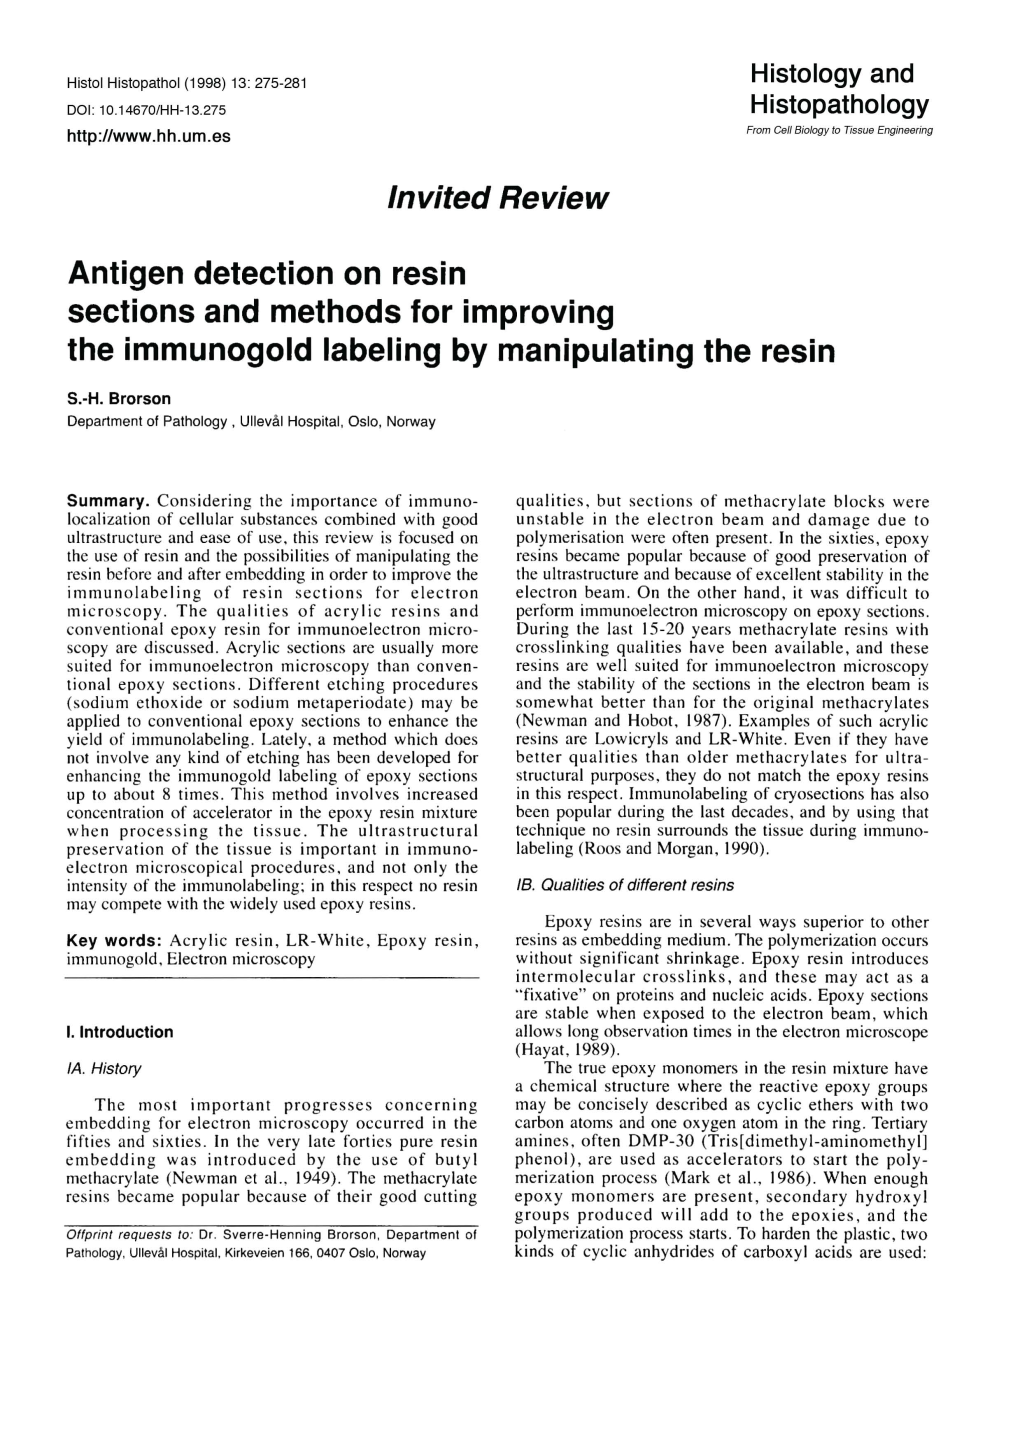 Invited Review Antigen Detection on Resin Sections and Methods For